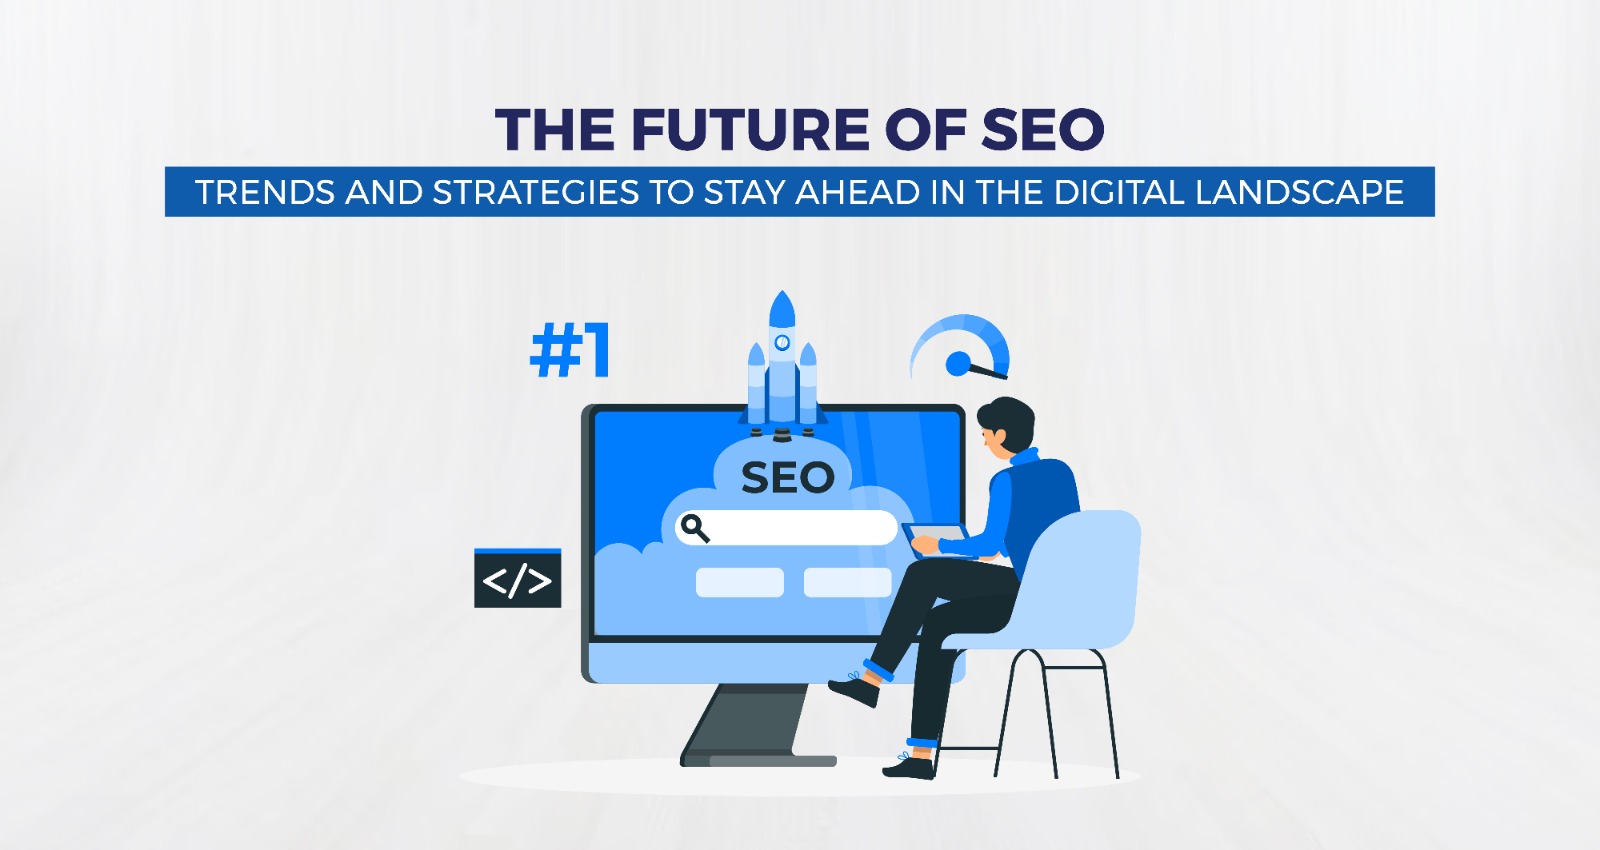 The-Future-of-SEO-Trends-and-Strategies-to-Stay-Ahead-in-the-Digital-Landscape-1.jpeg